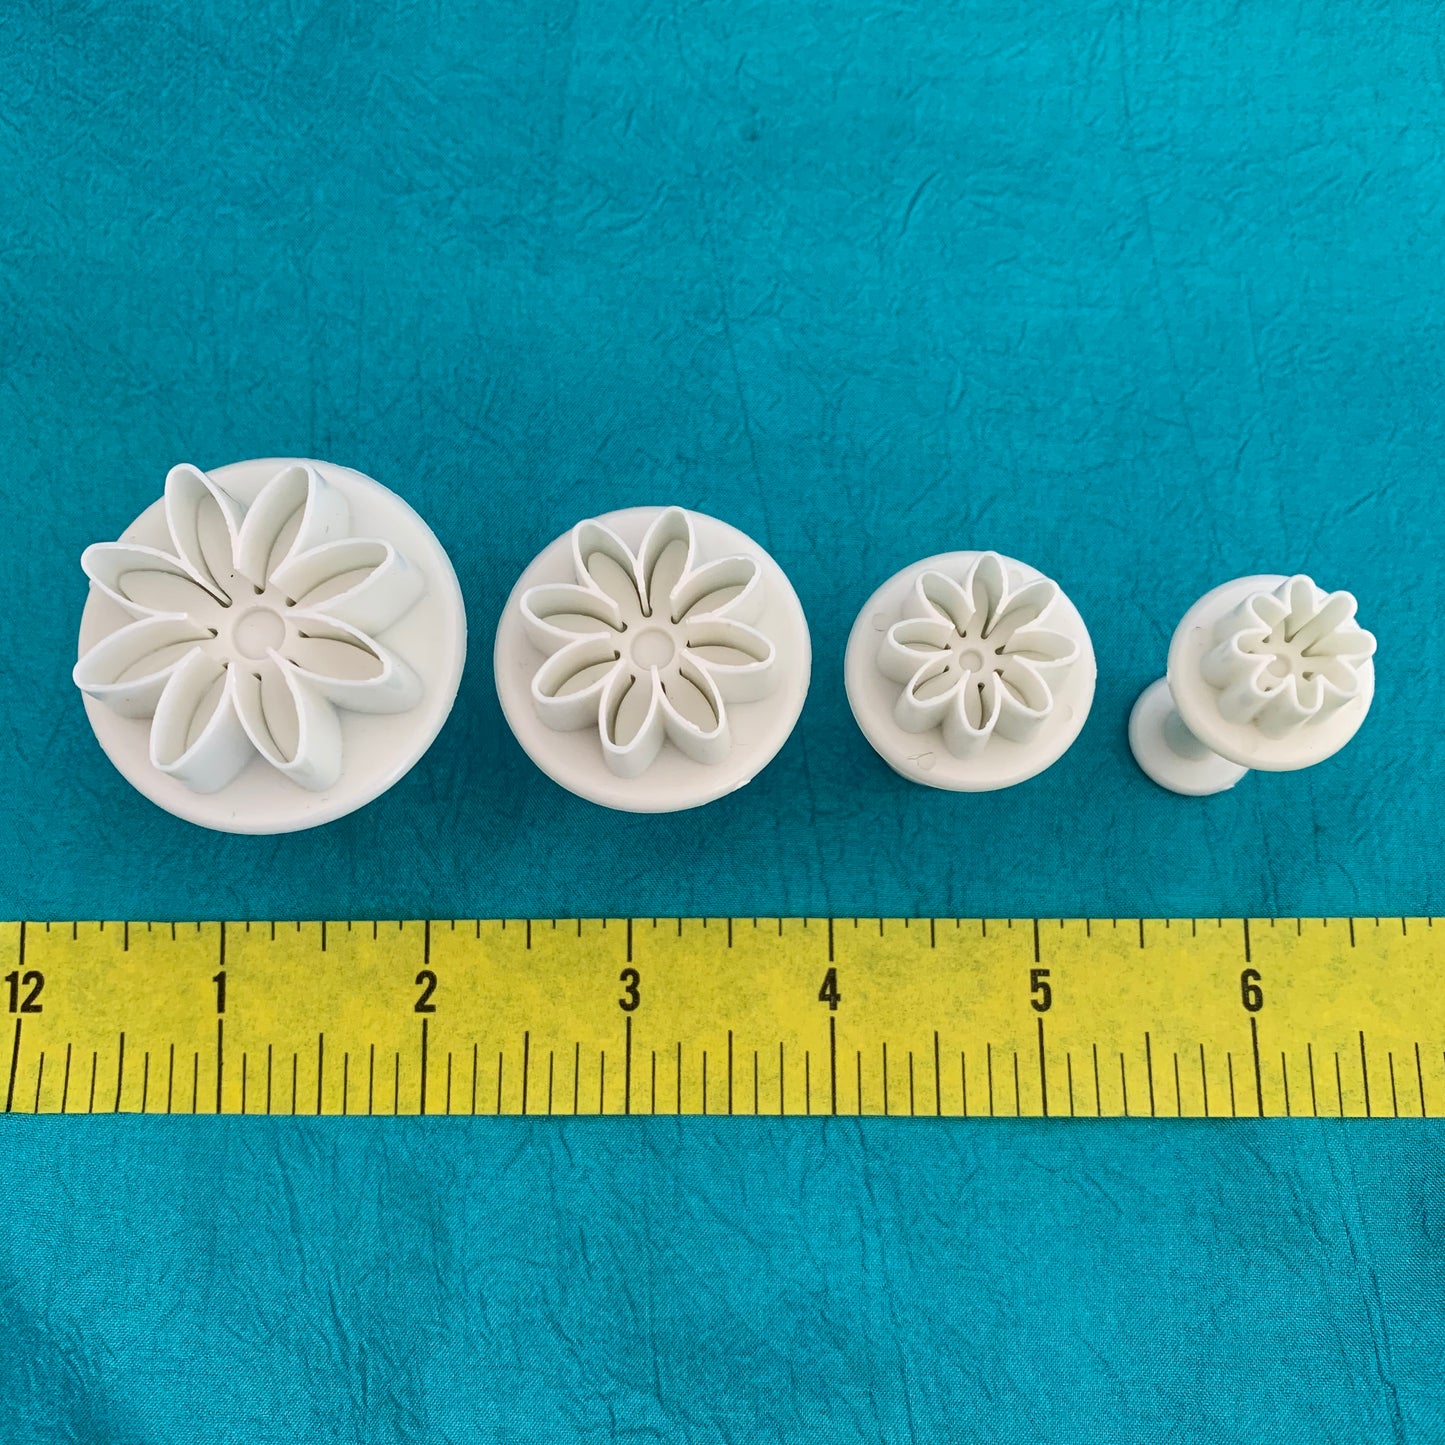 Daisy Plunger Cutters For Polymer Clay And More - Polymer Clay TV tutorial and supplies